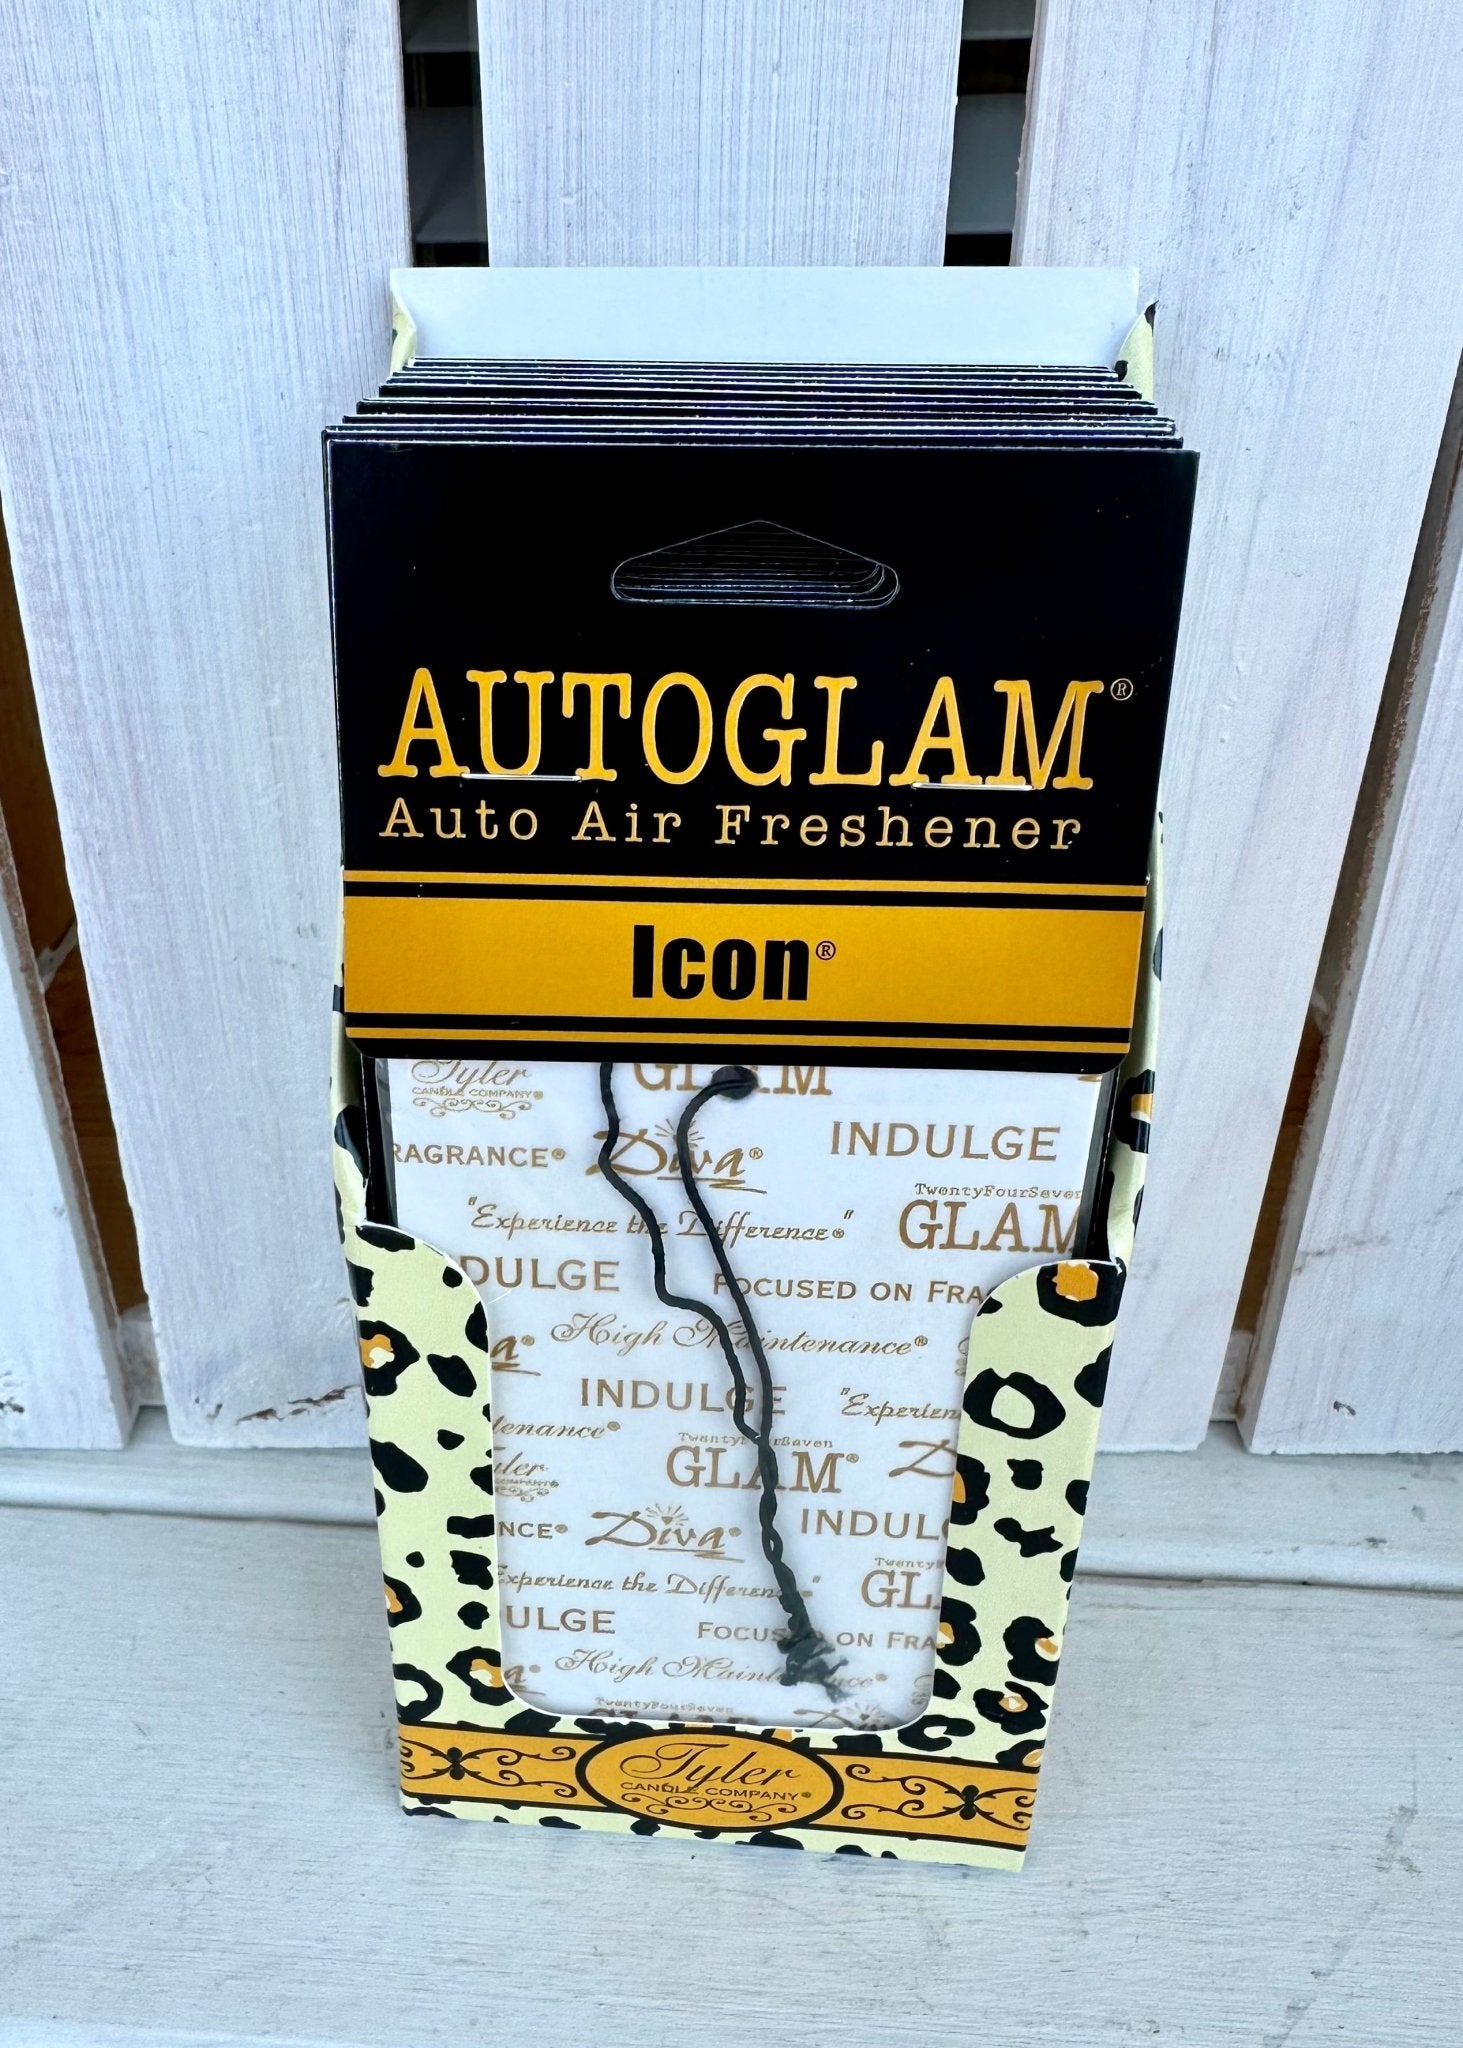 AutoGlam Car Scents - Tyler Candle Company - Jimberly's Boutique